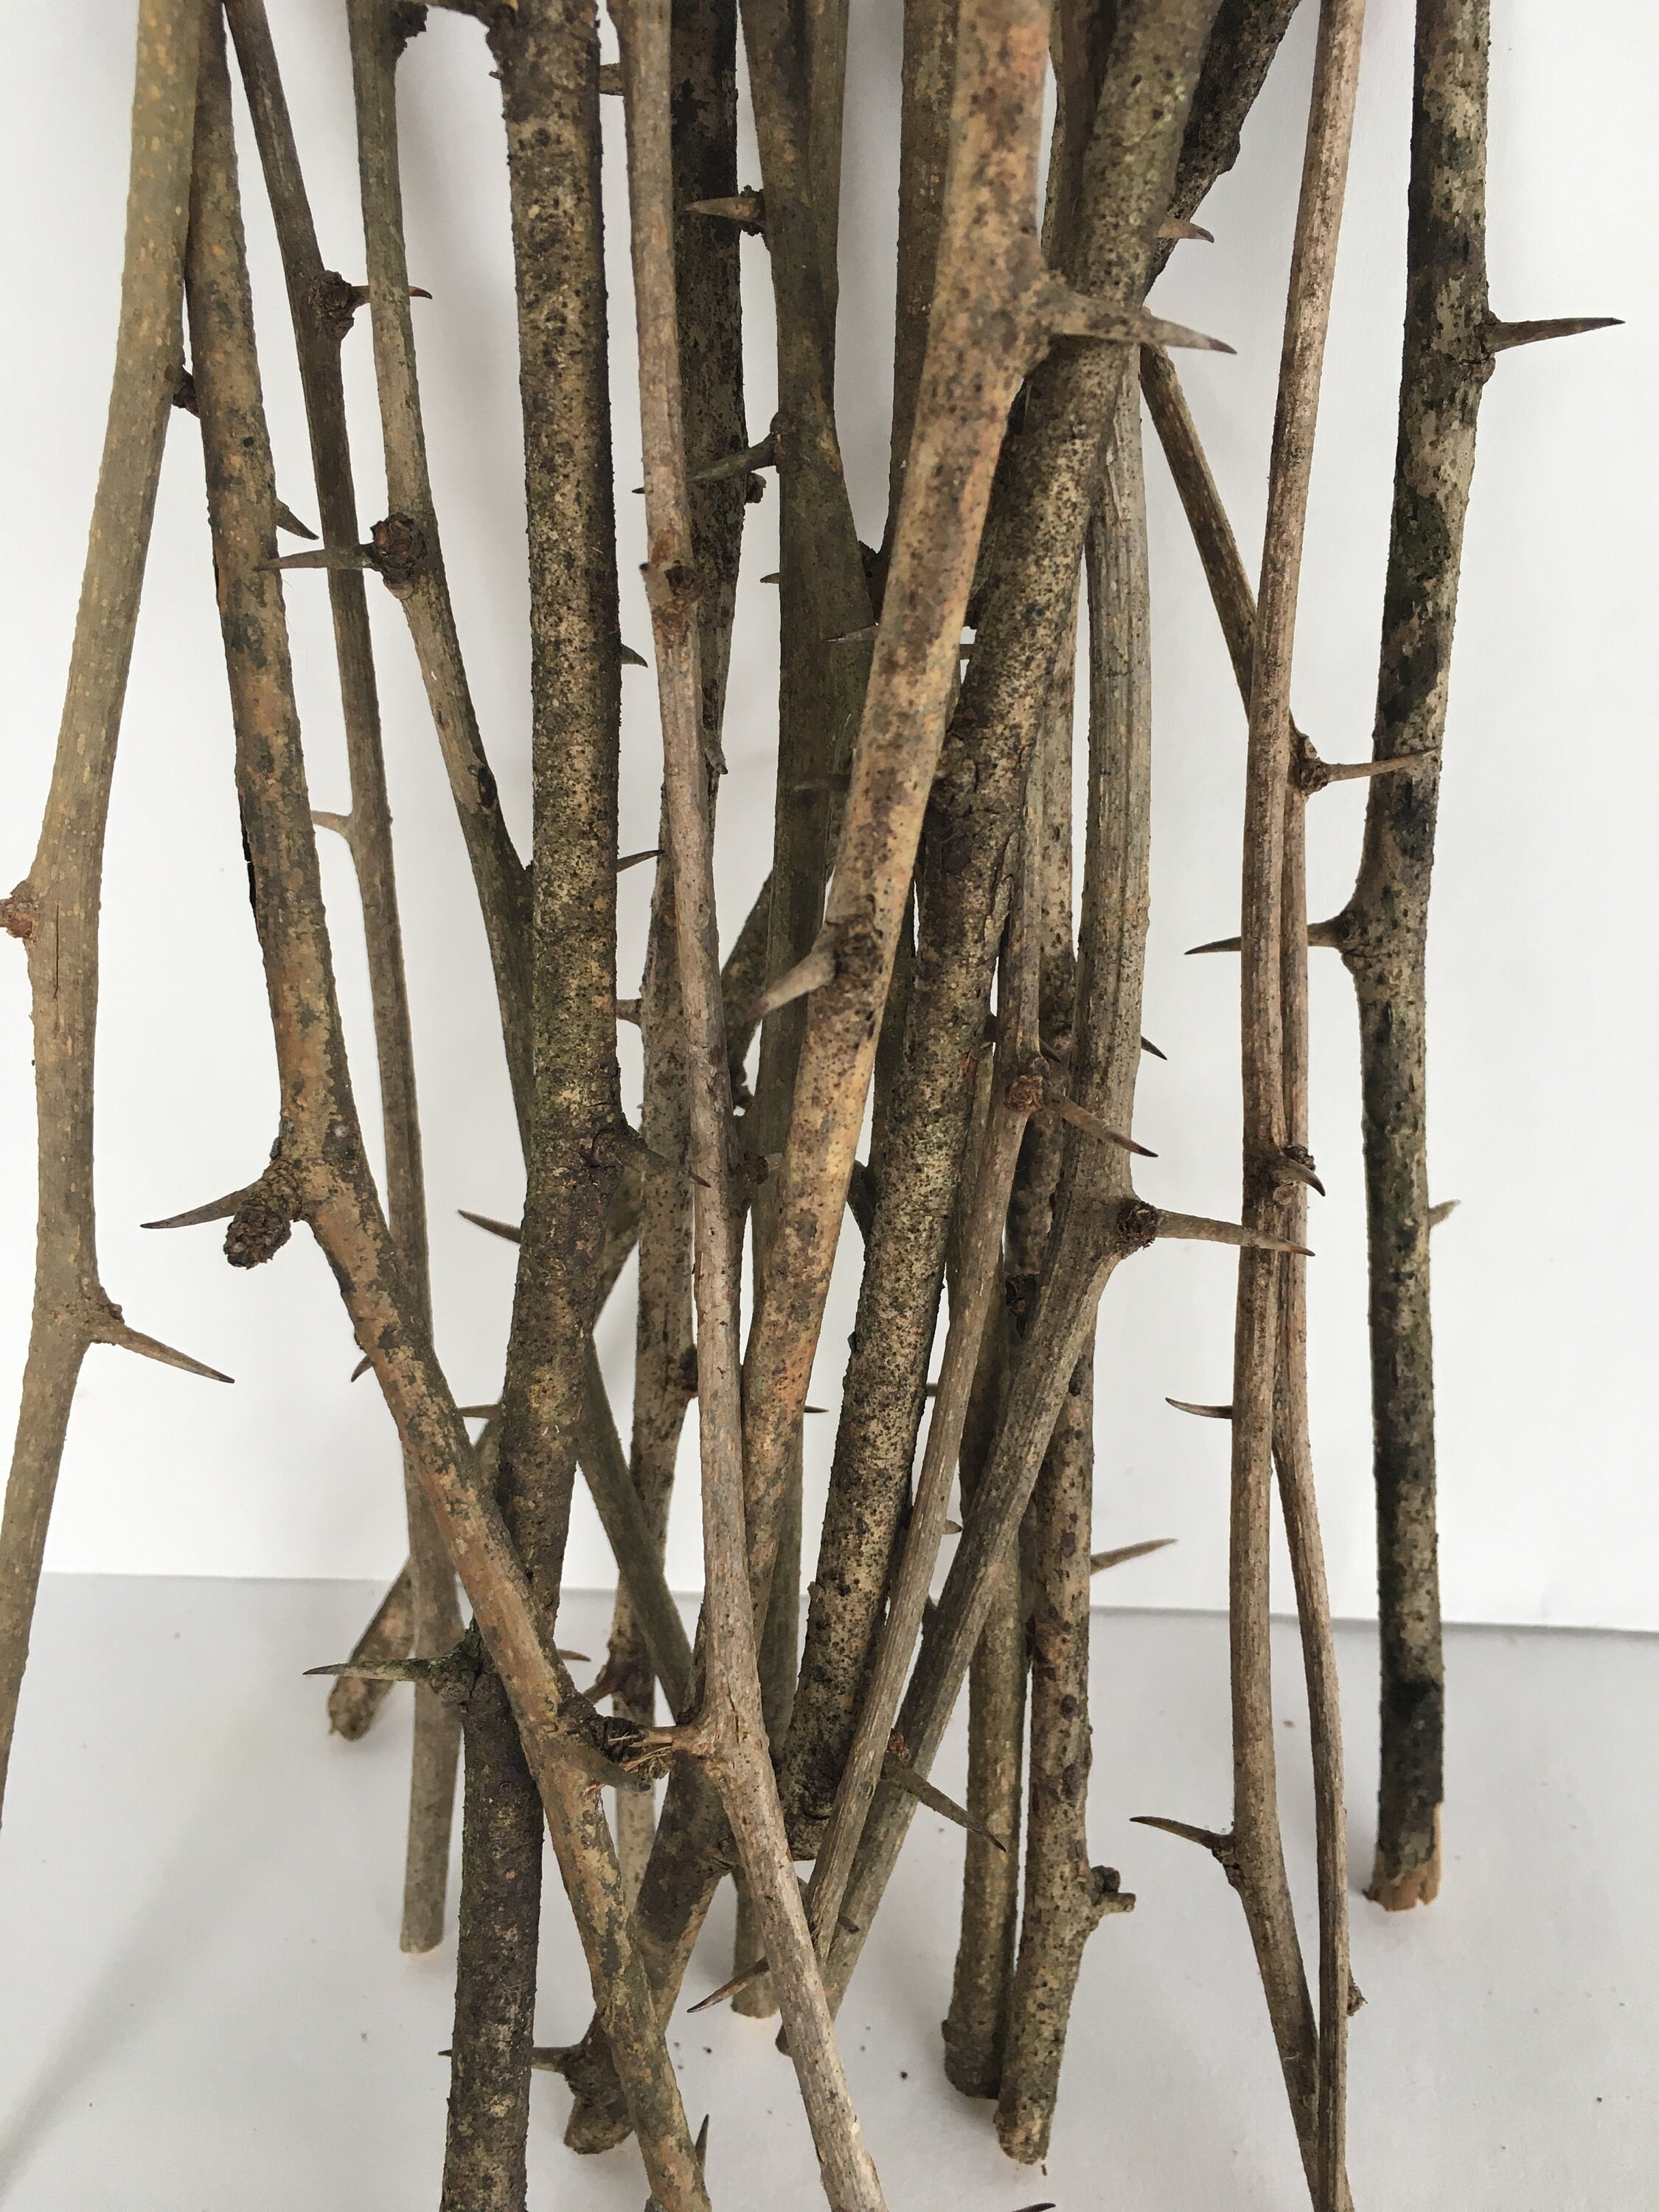 50 Thorn Branches, Dried Rose Stems for Vases and Home Decor